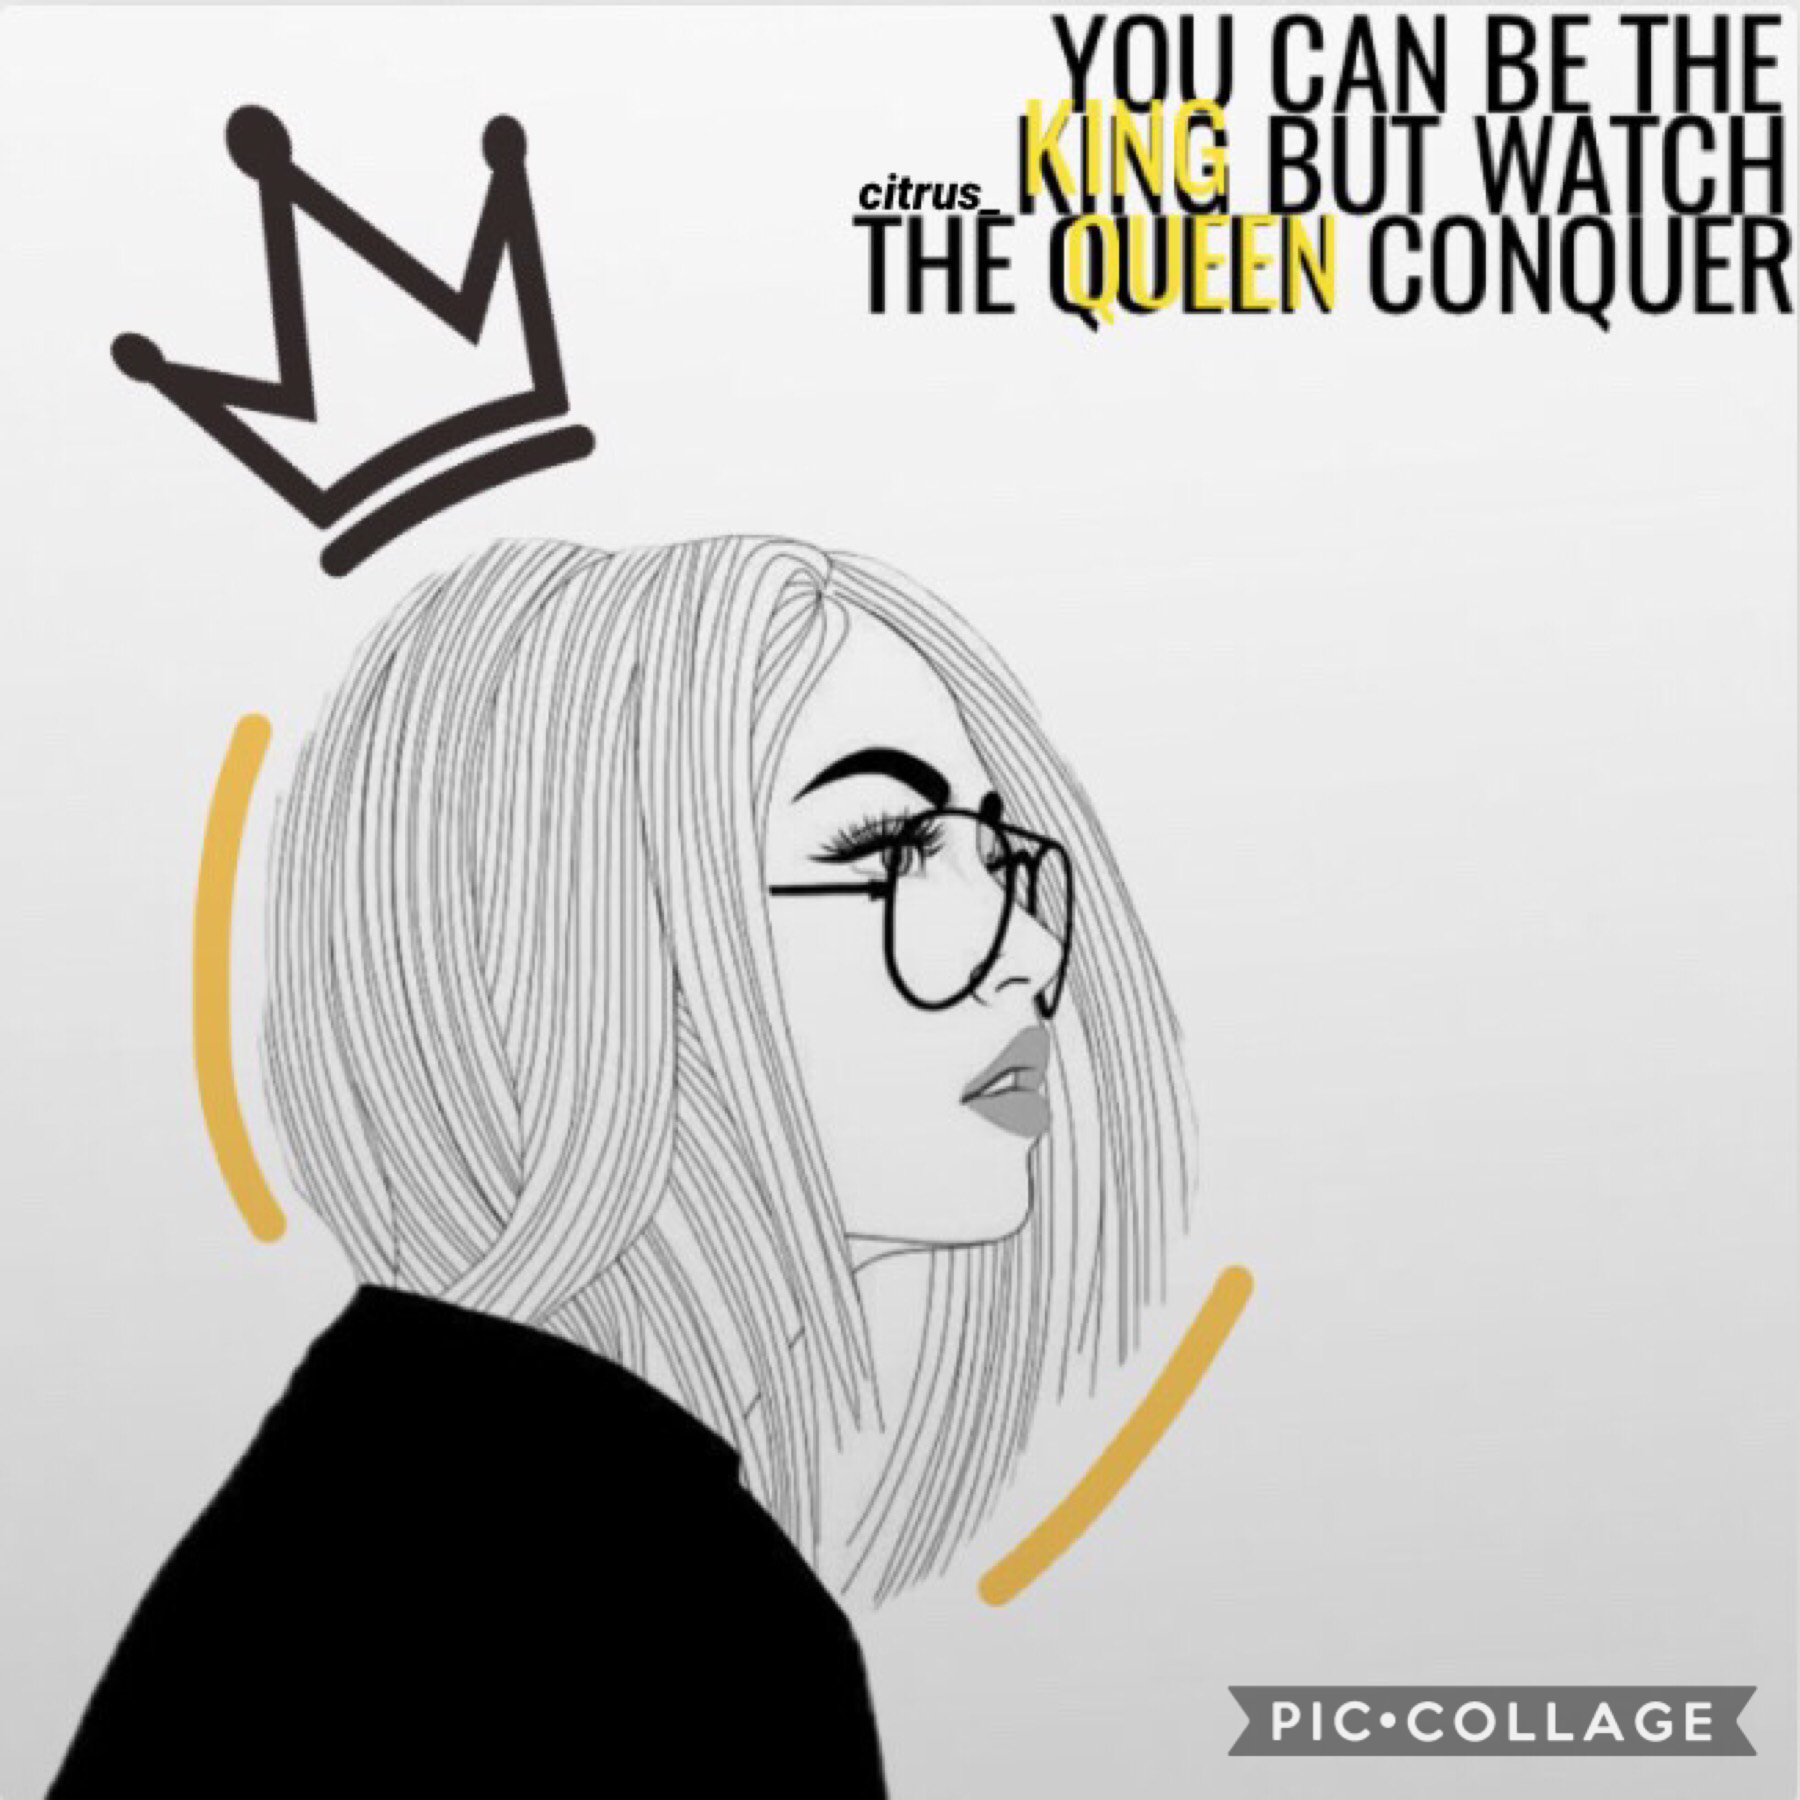 👑click here👑

all of yall are beautiful and unique individuals. please dont let anyone take advantage of that, be you to the fullest❤️